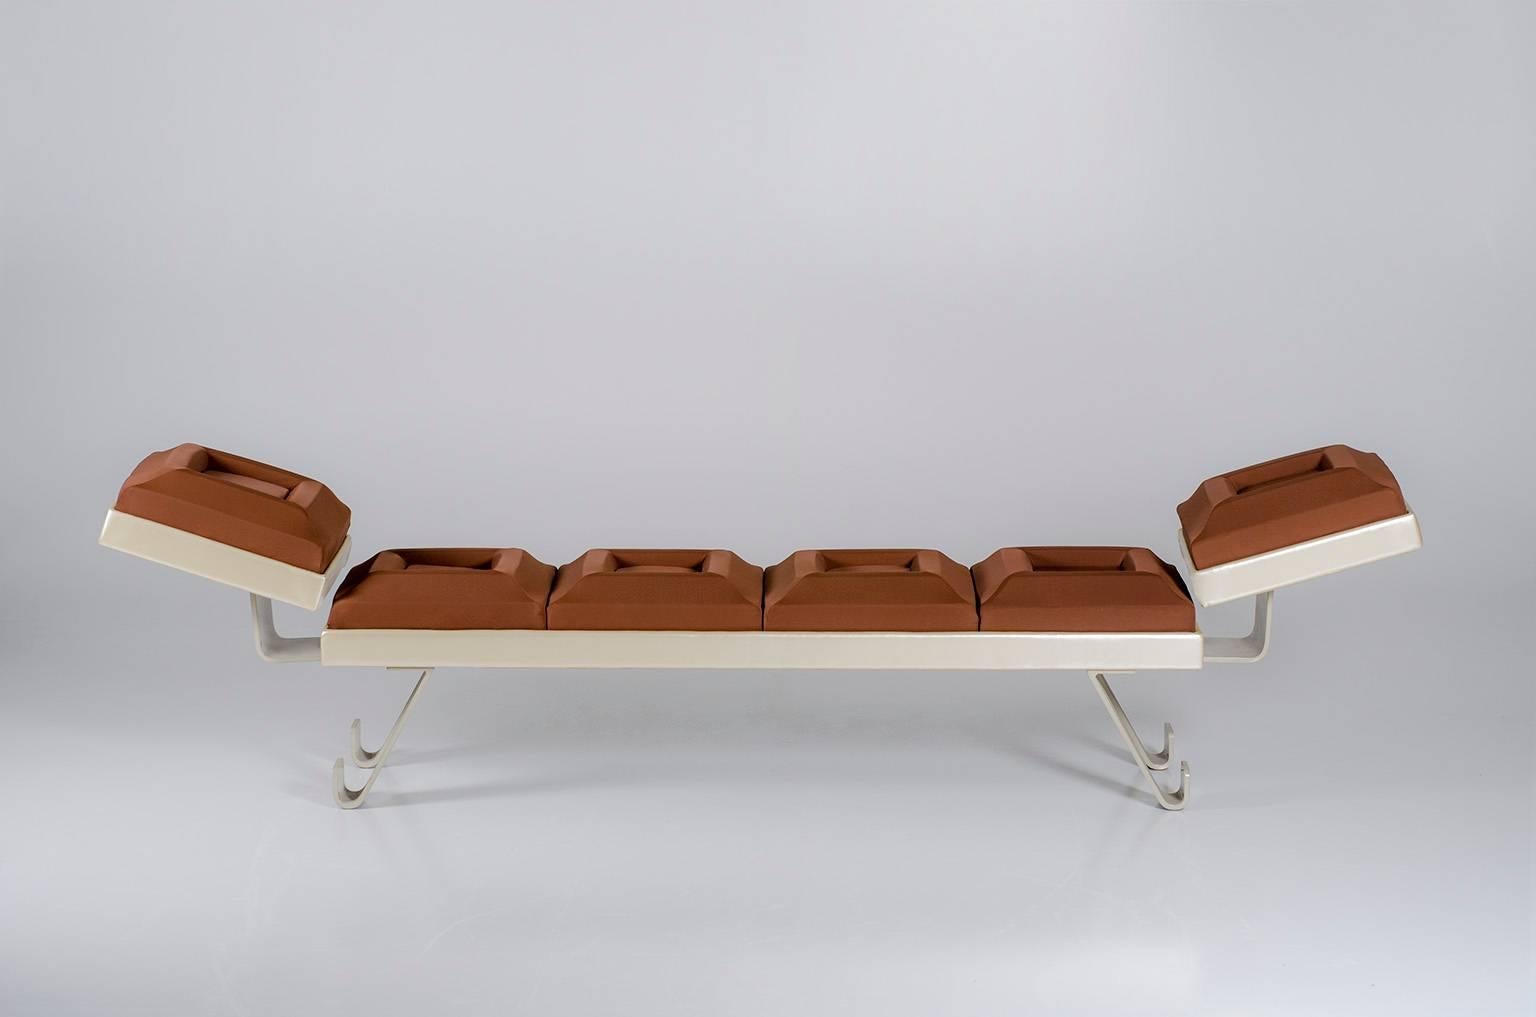 Chocolate will save the world.
By matching two or more squares, the food of the gods becomes a dream come true.
Benches, dormeuse, seating, sofas, comfortable chaise longues will fulfill the spaces and desires of every gourmet.
Powder-coated